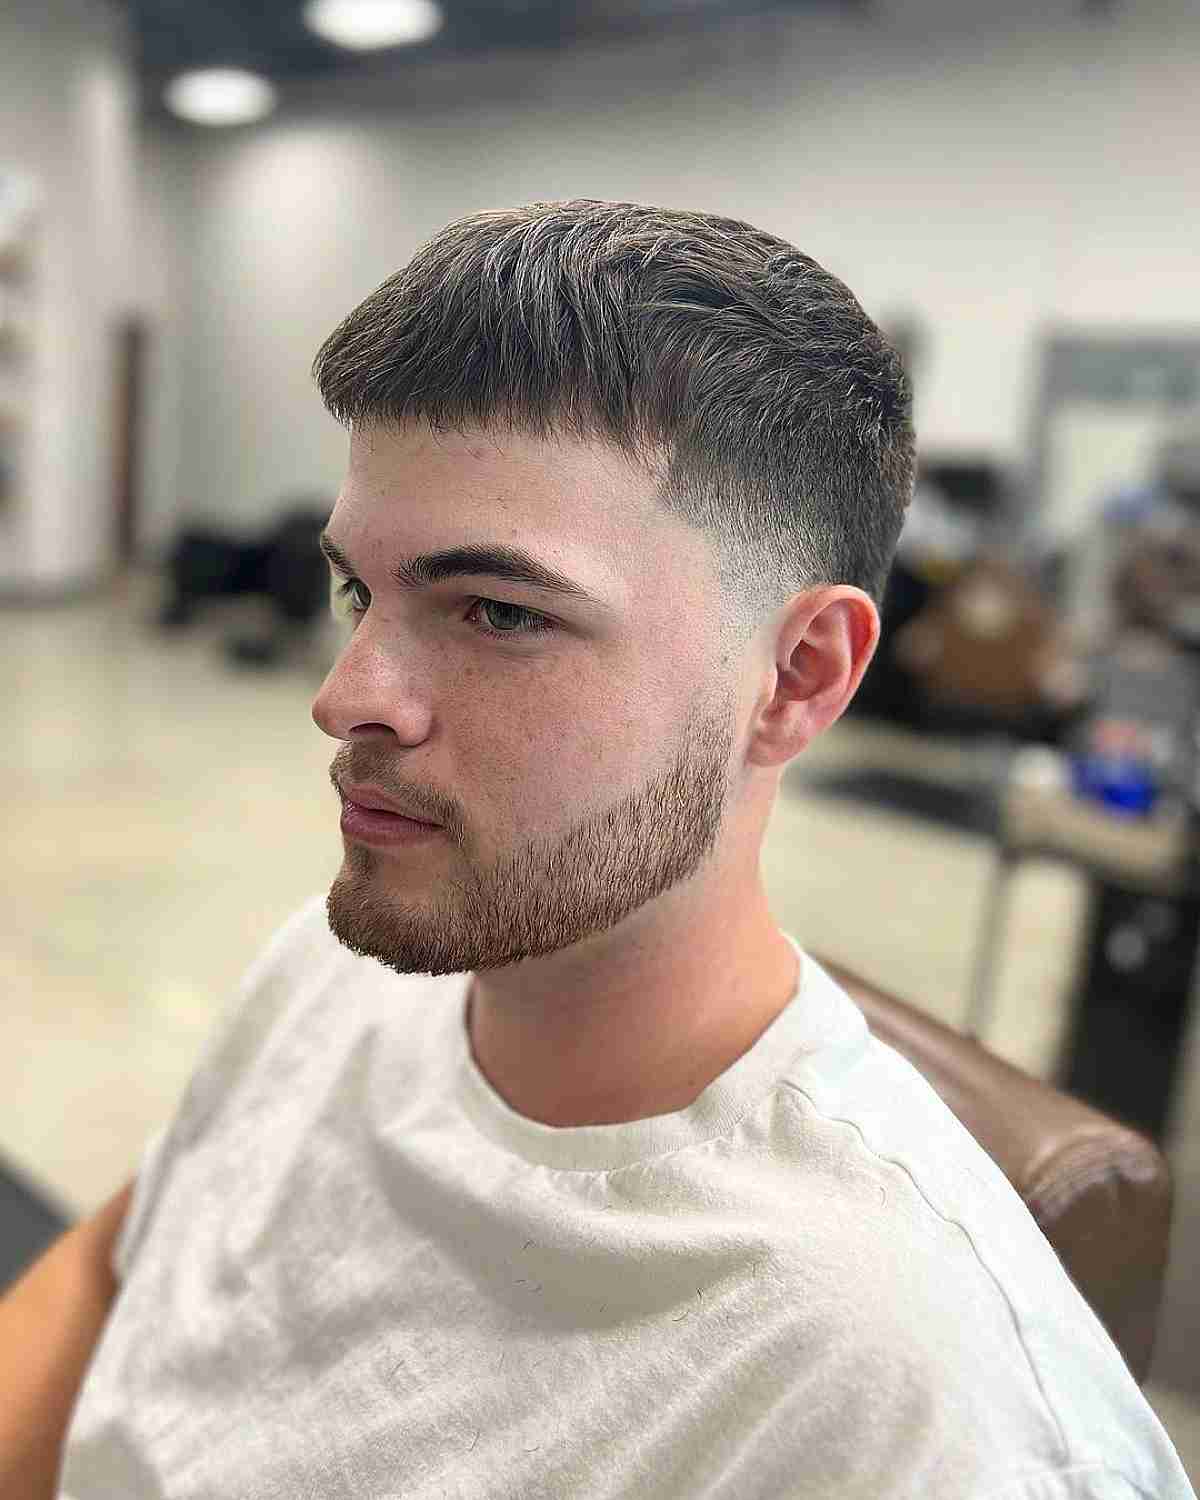 Faded Haircut with Short Fringe and Low Taper